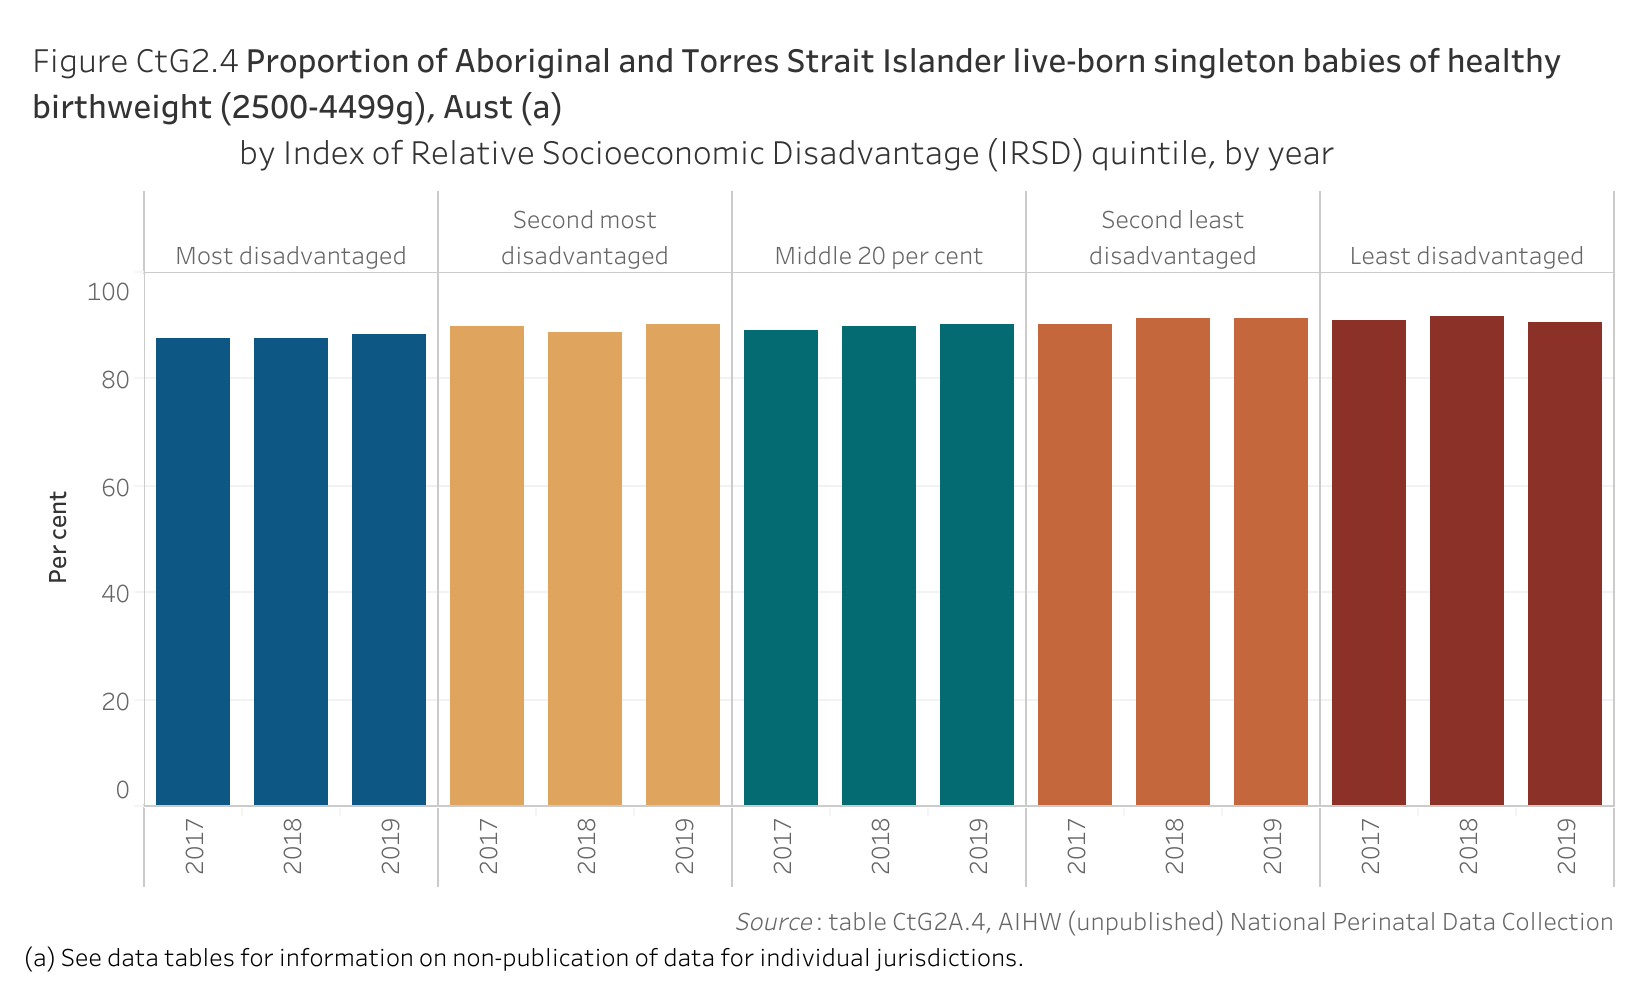 Figure CtG2.4. Bar chart showing the proportion of Aboriginal and Torres Strait Islander live-born singleton babies of healthy birthweight (2500-4499g) in Australia, by Index of Relative Socioeconomic Disadvantage (IRSD) quintile and by year. Data table of figure CtG2.4 is below.